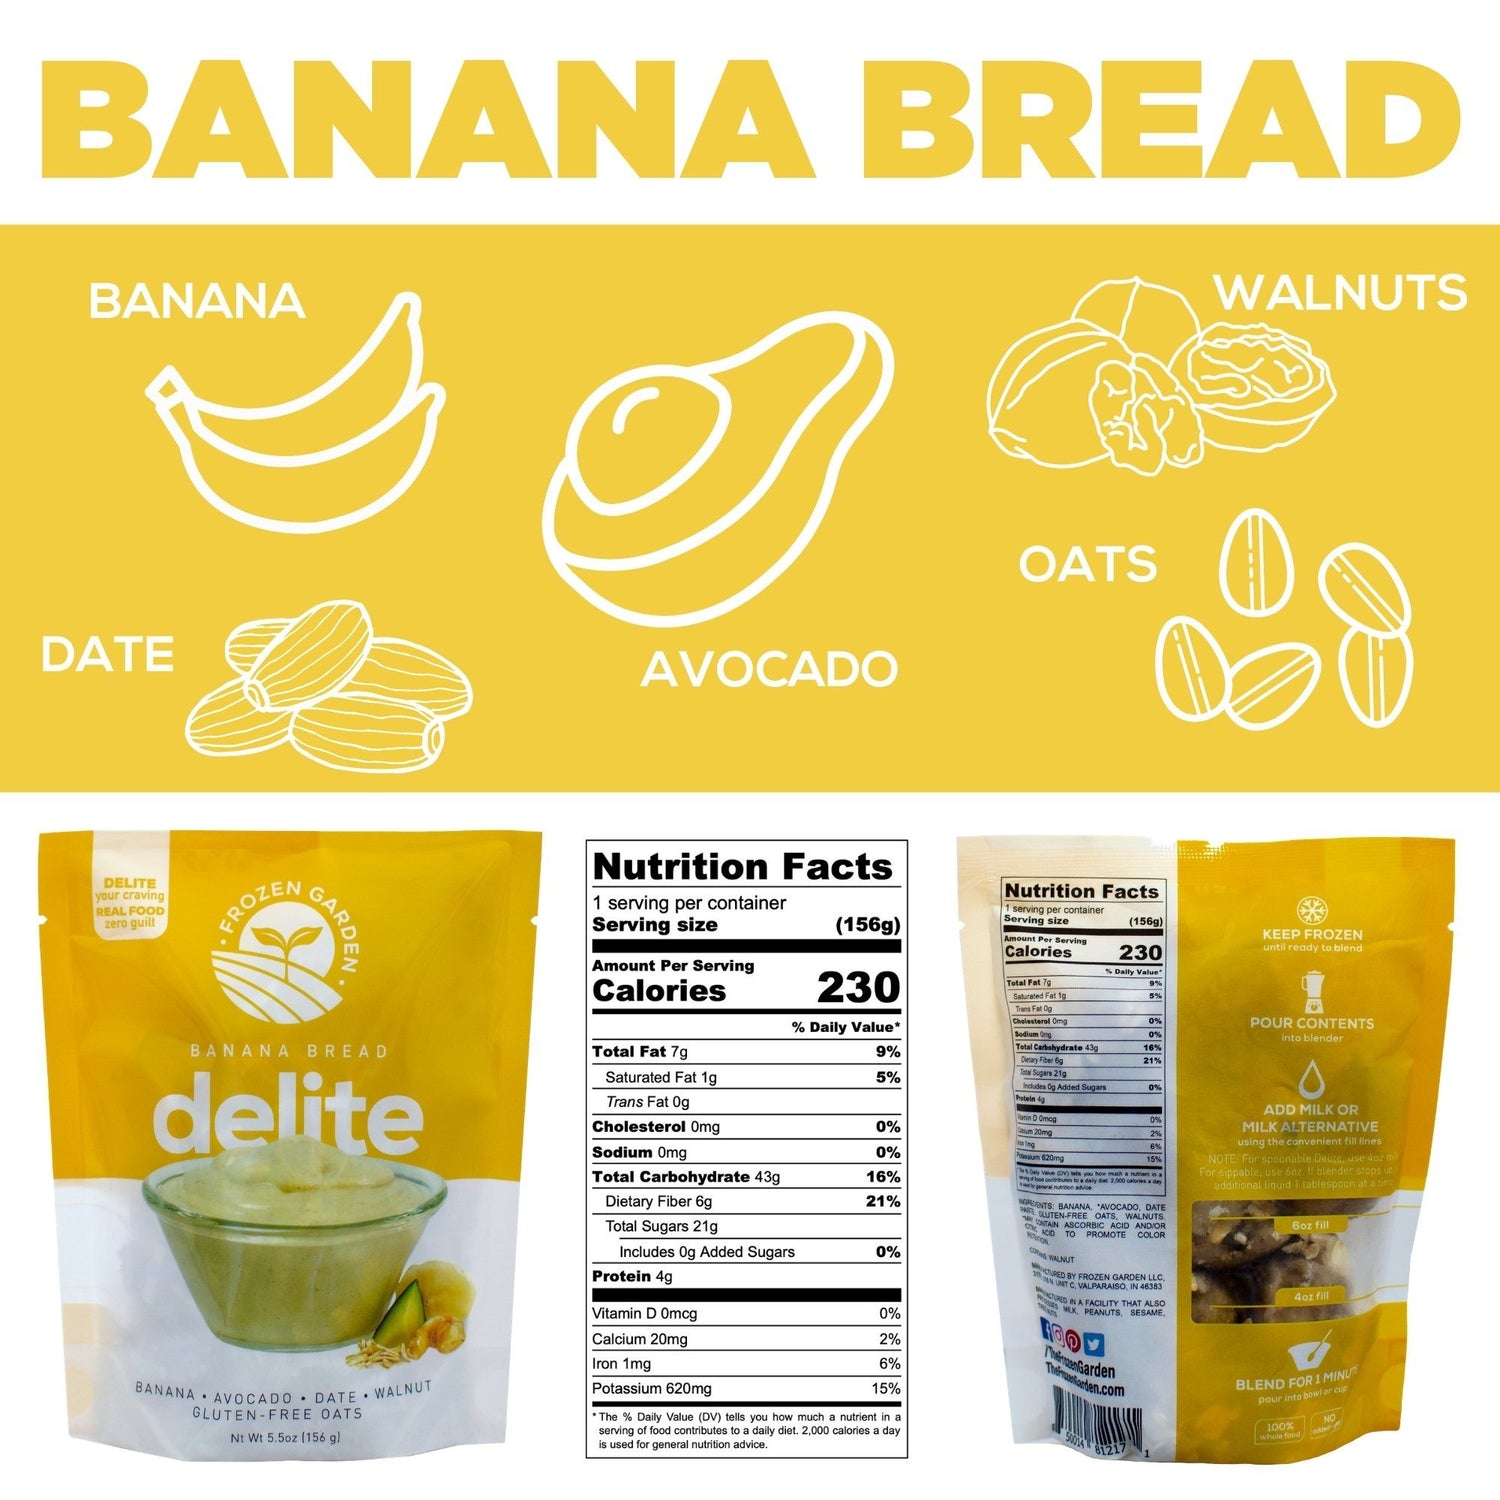 Banana Bread Delite ingredients. doodle drawings of bananas, oats, walnuts, dates, and avocado. With nutrition facts 230 calories 7 grams total fat 1 gram saturated fat 0 grams trans fat 0 milligrams cholesterol 0 milligrams sodium 43 grams total carbohydrates 6 grams dietary fiber 21 grams total sugars includes 0 grams added sugars 4 grams protein 0 micrograms Vitamin D 20 milligrams Calcium 1 milligram Iron 620 milligrams potassium